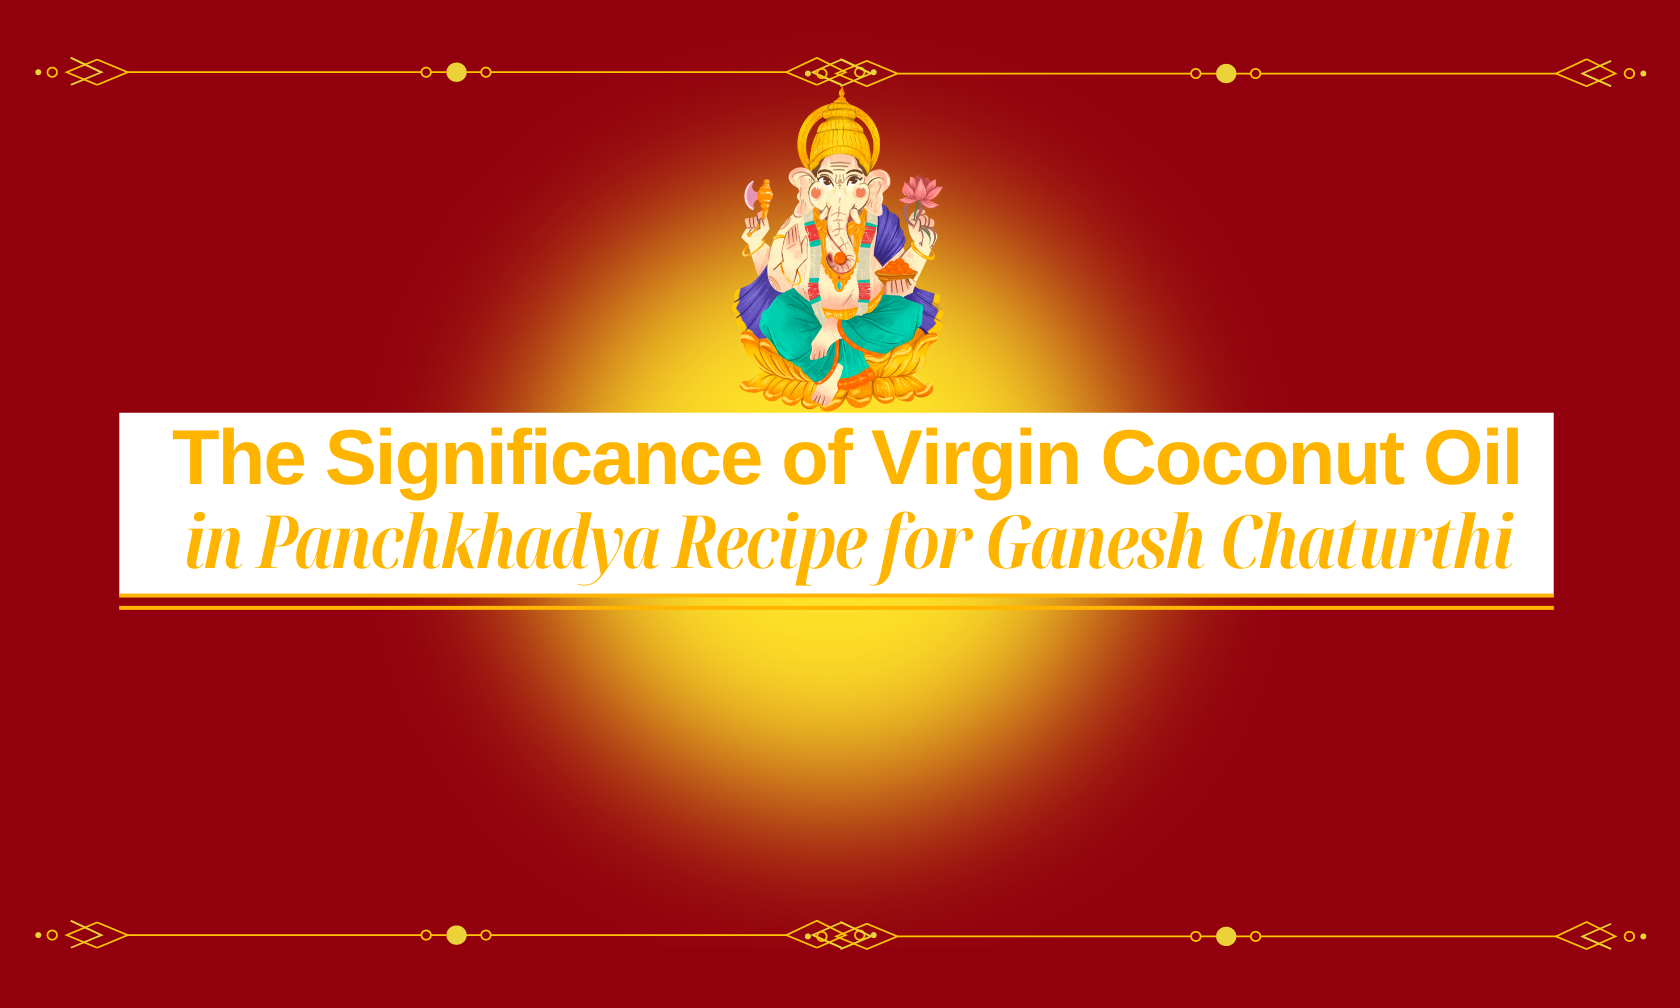 The Significance of Virgin Coconut Oil in Panchkhadya Recipe for Ganesh Chaturthi